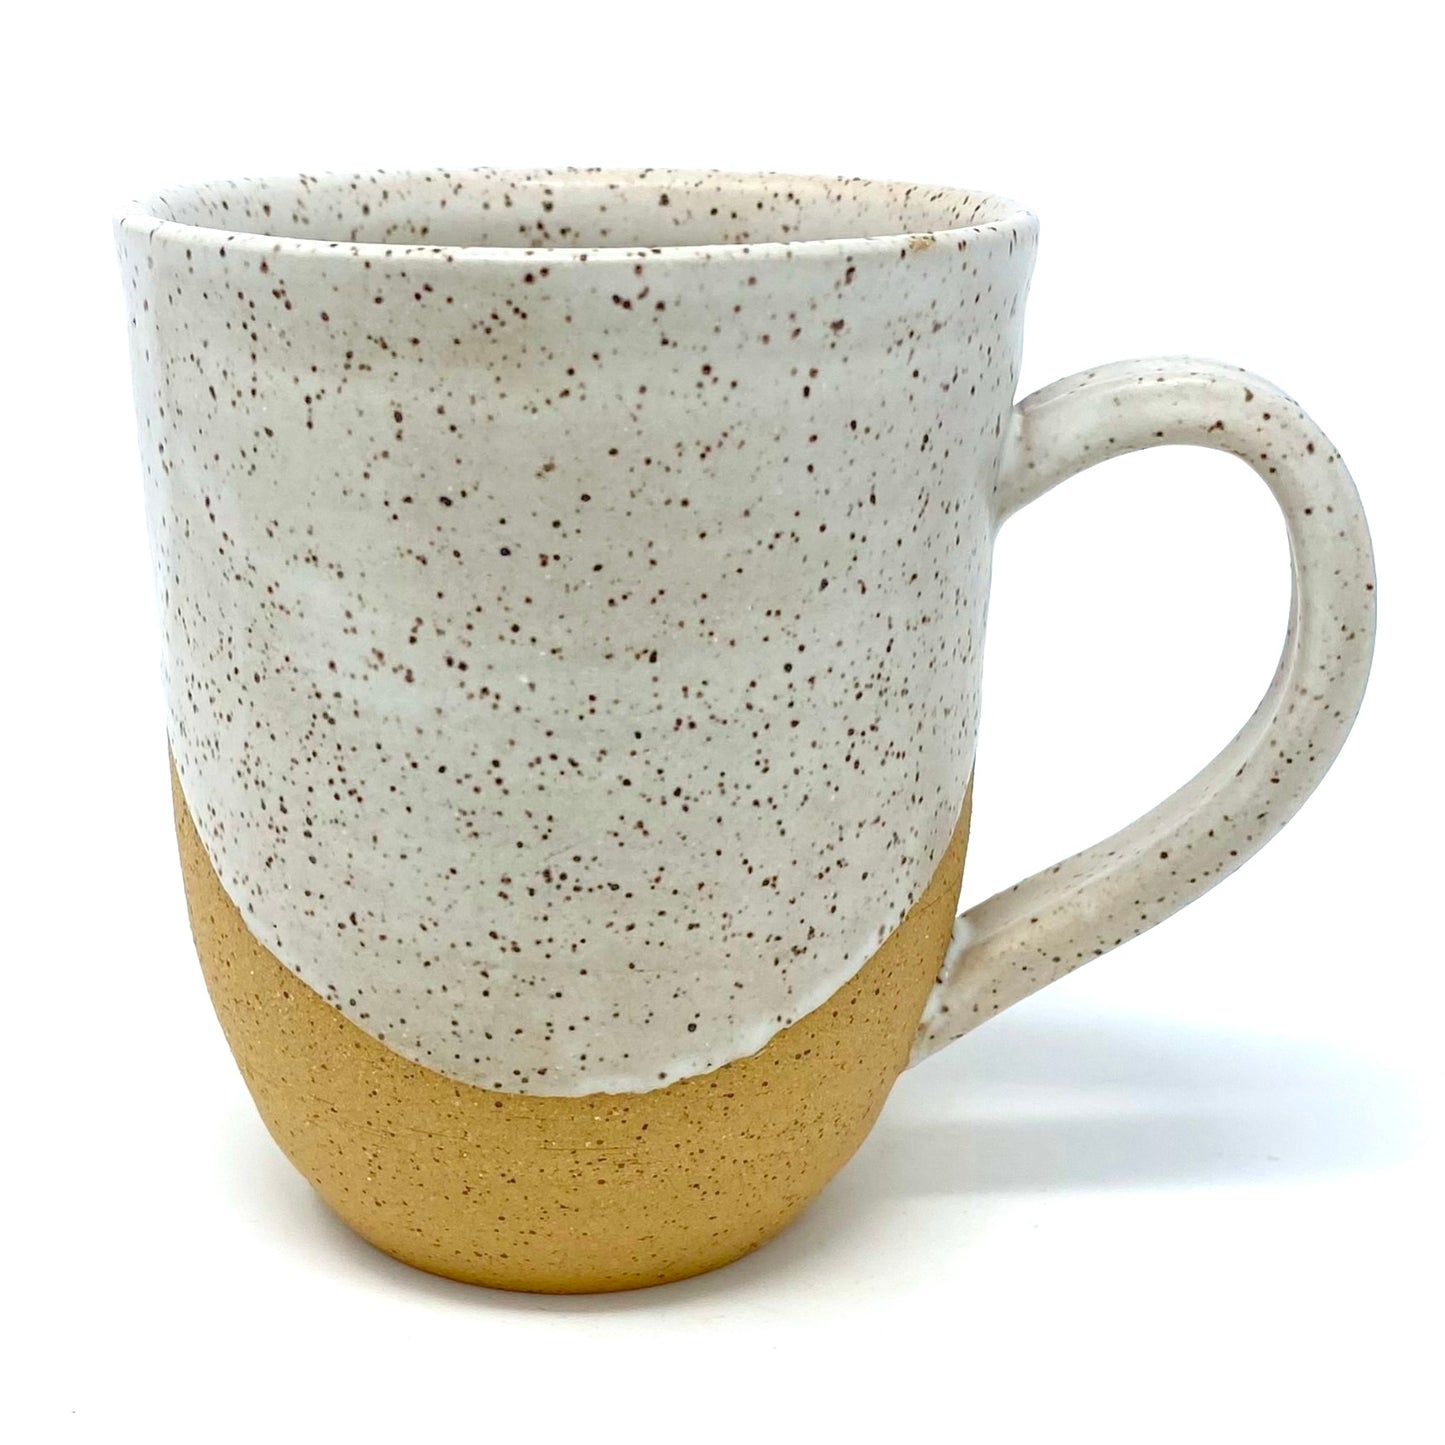 mug as seen from the back. the white glaze nearly covers the back.